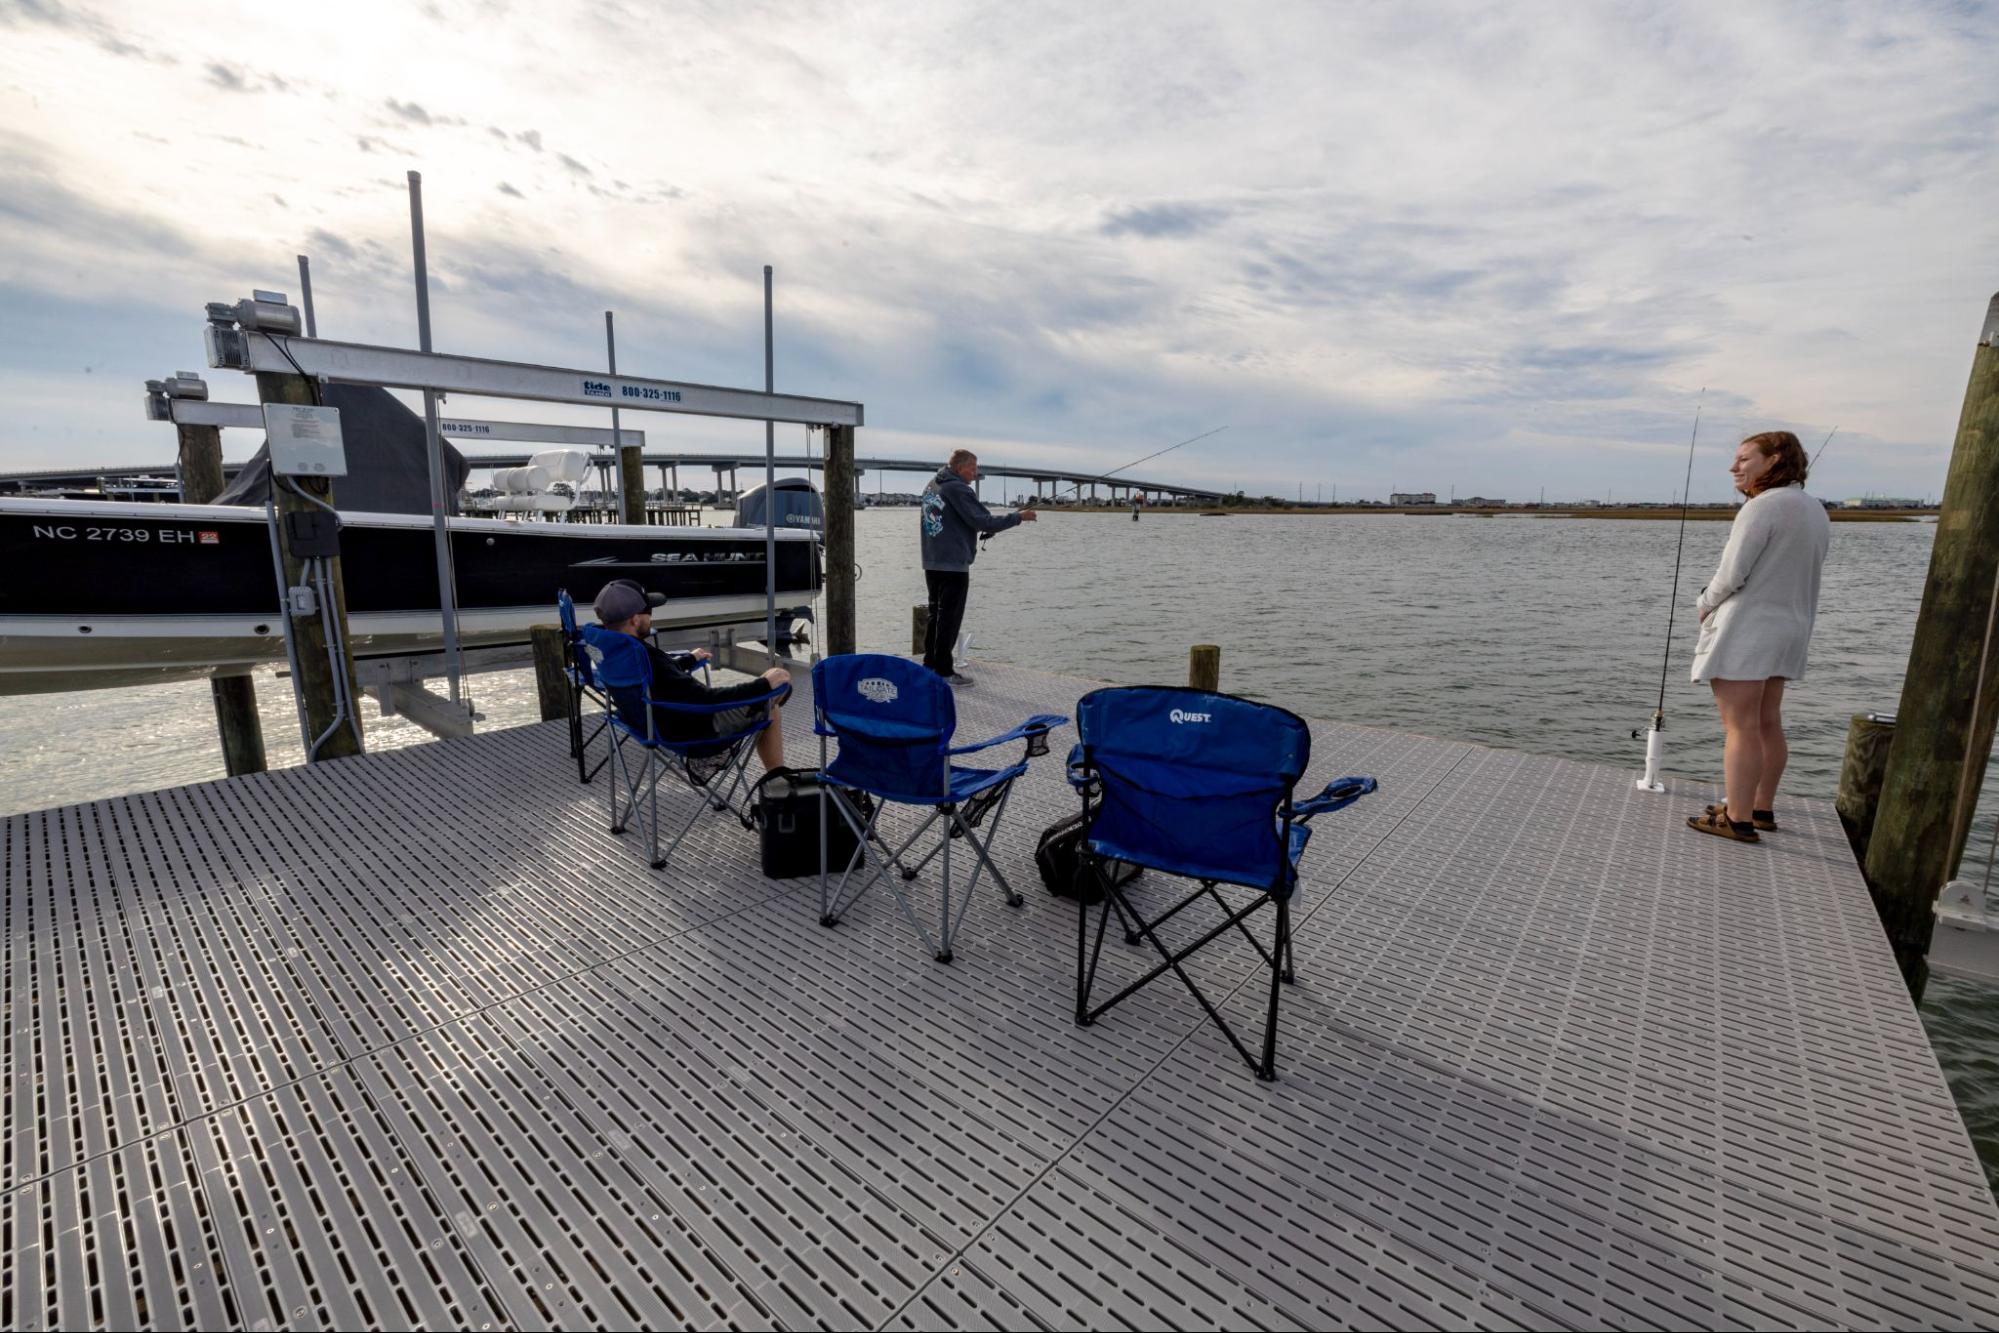 Three people stand on a marine dock with Titan Deck decking. One is holding a fishing pole and one is sitting in one of three blue folding chairs.